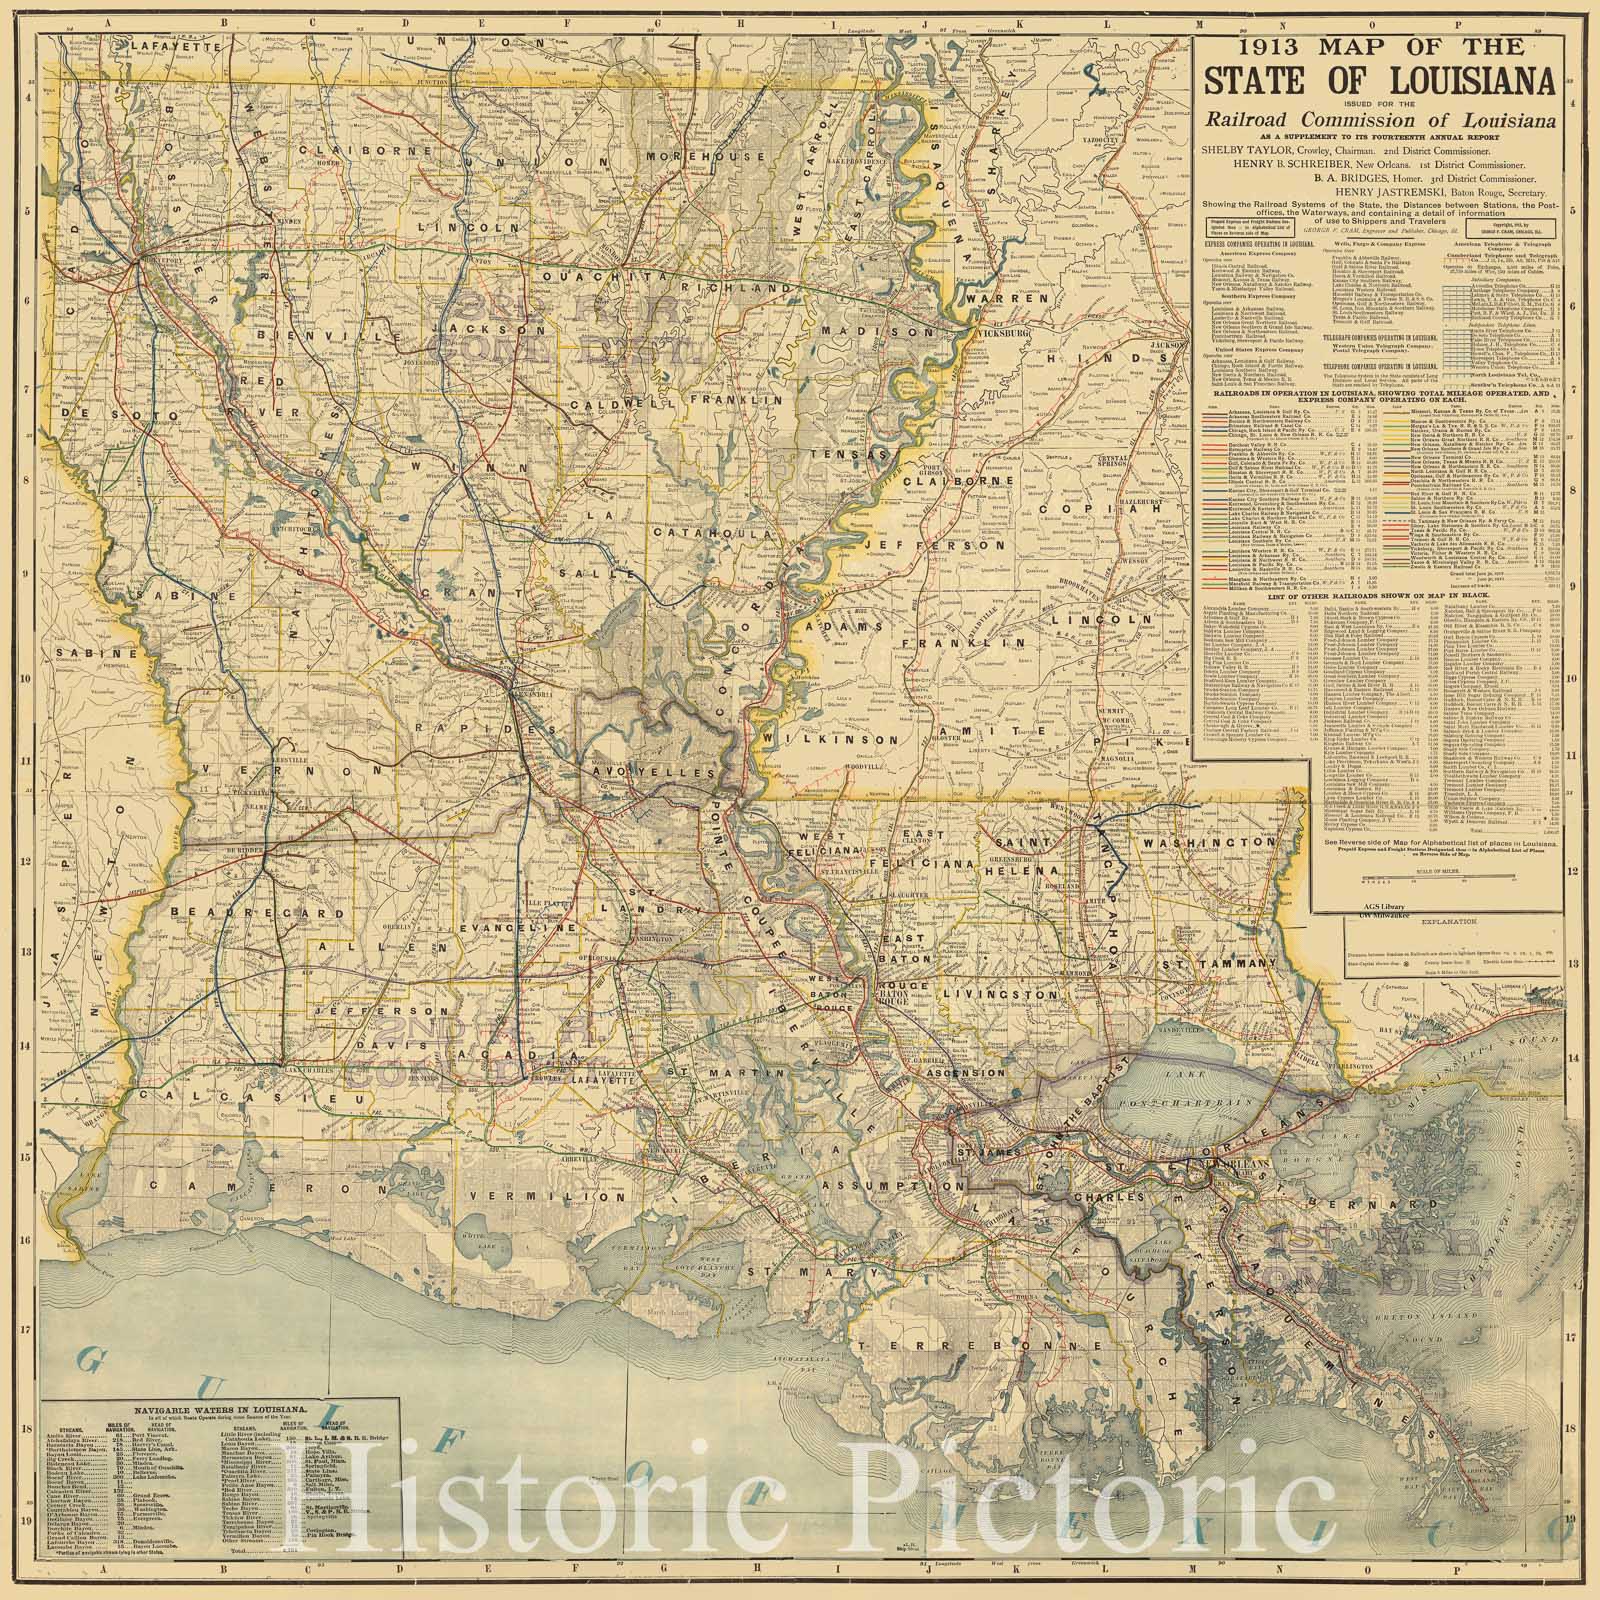 Map : Louisiana 1913, 1913 map of the state of Louisiana , Antique Vintage Reproduction